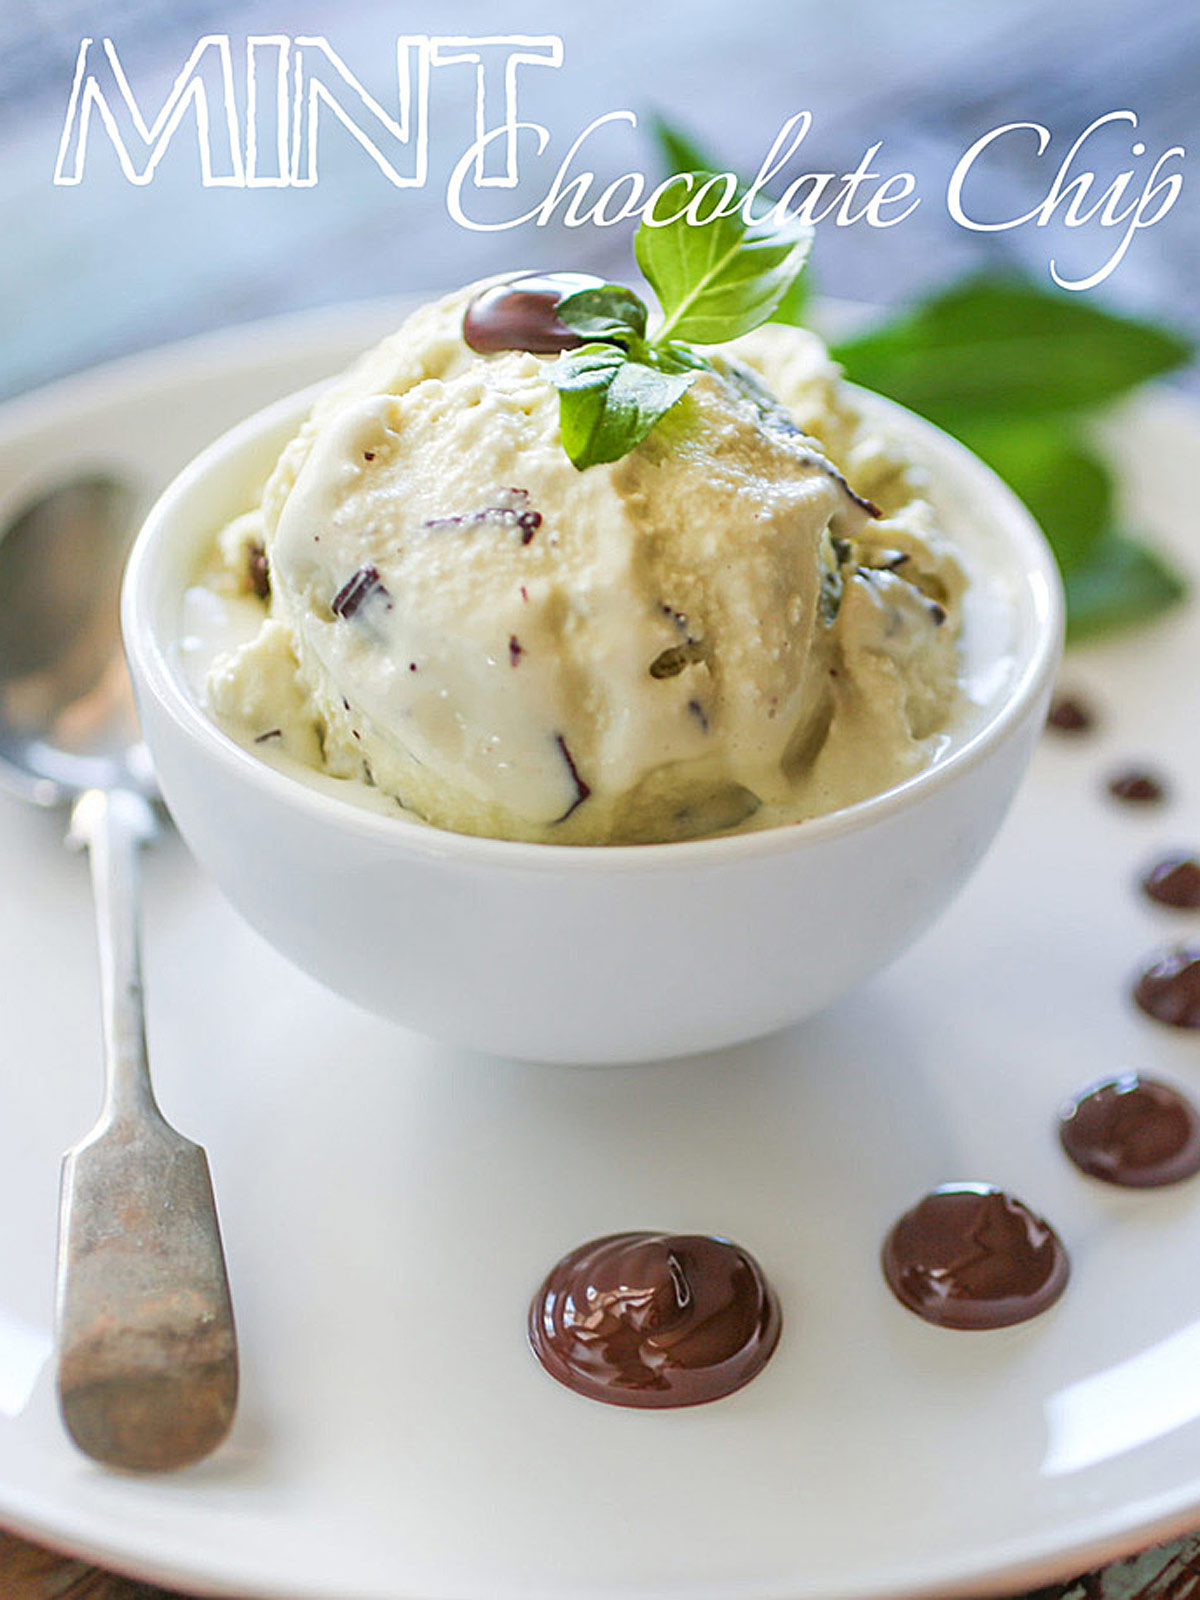 A luscious scoop of mint chocolate chip ice cream sits beautifully on a pristine white plate with drops of chocolate.